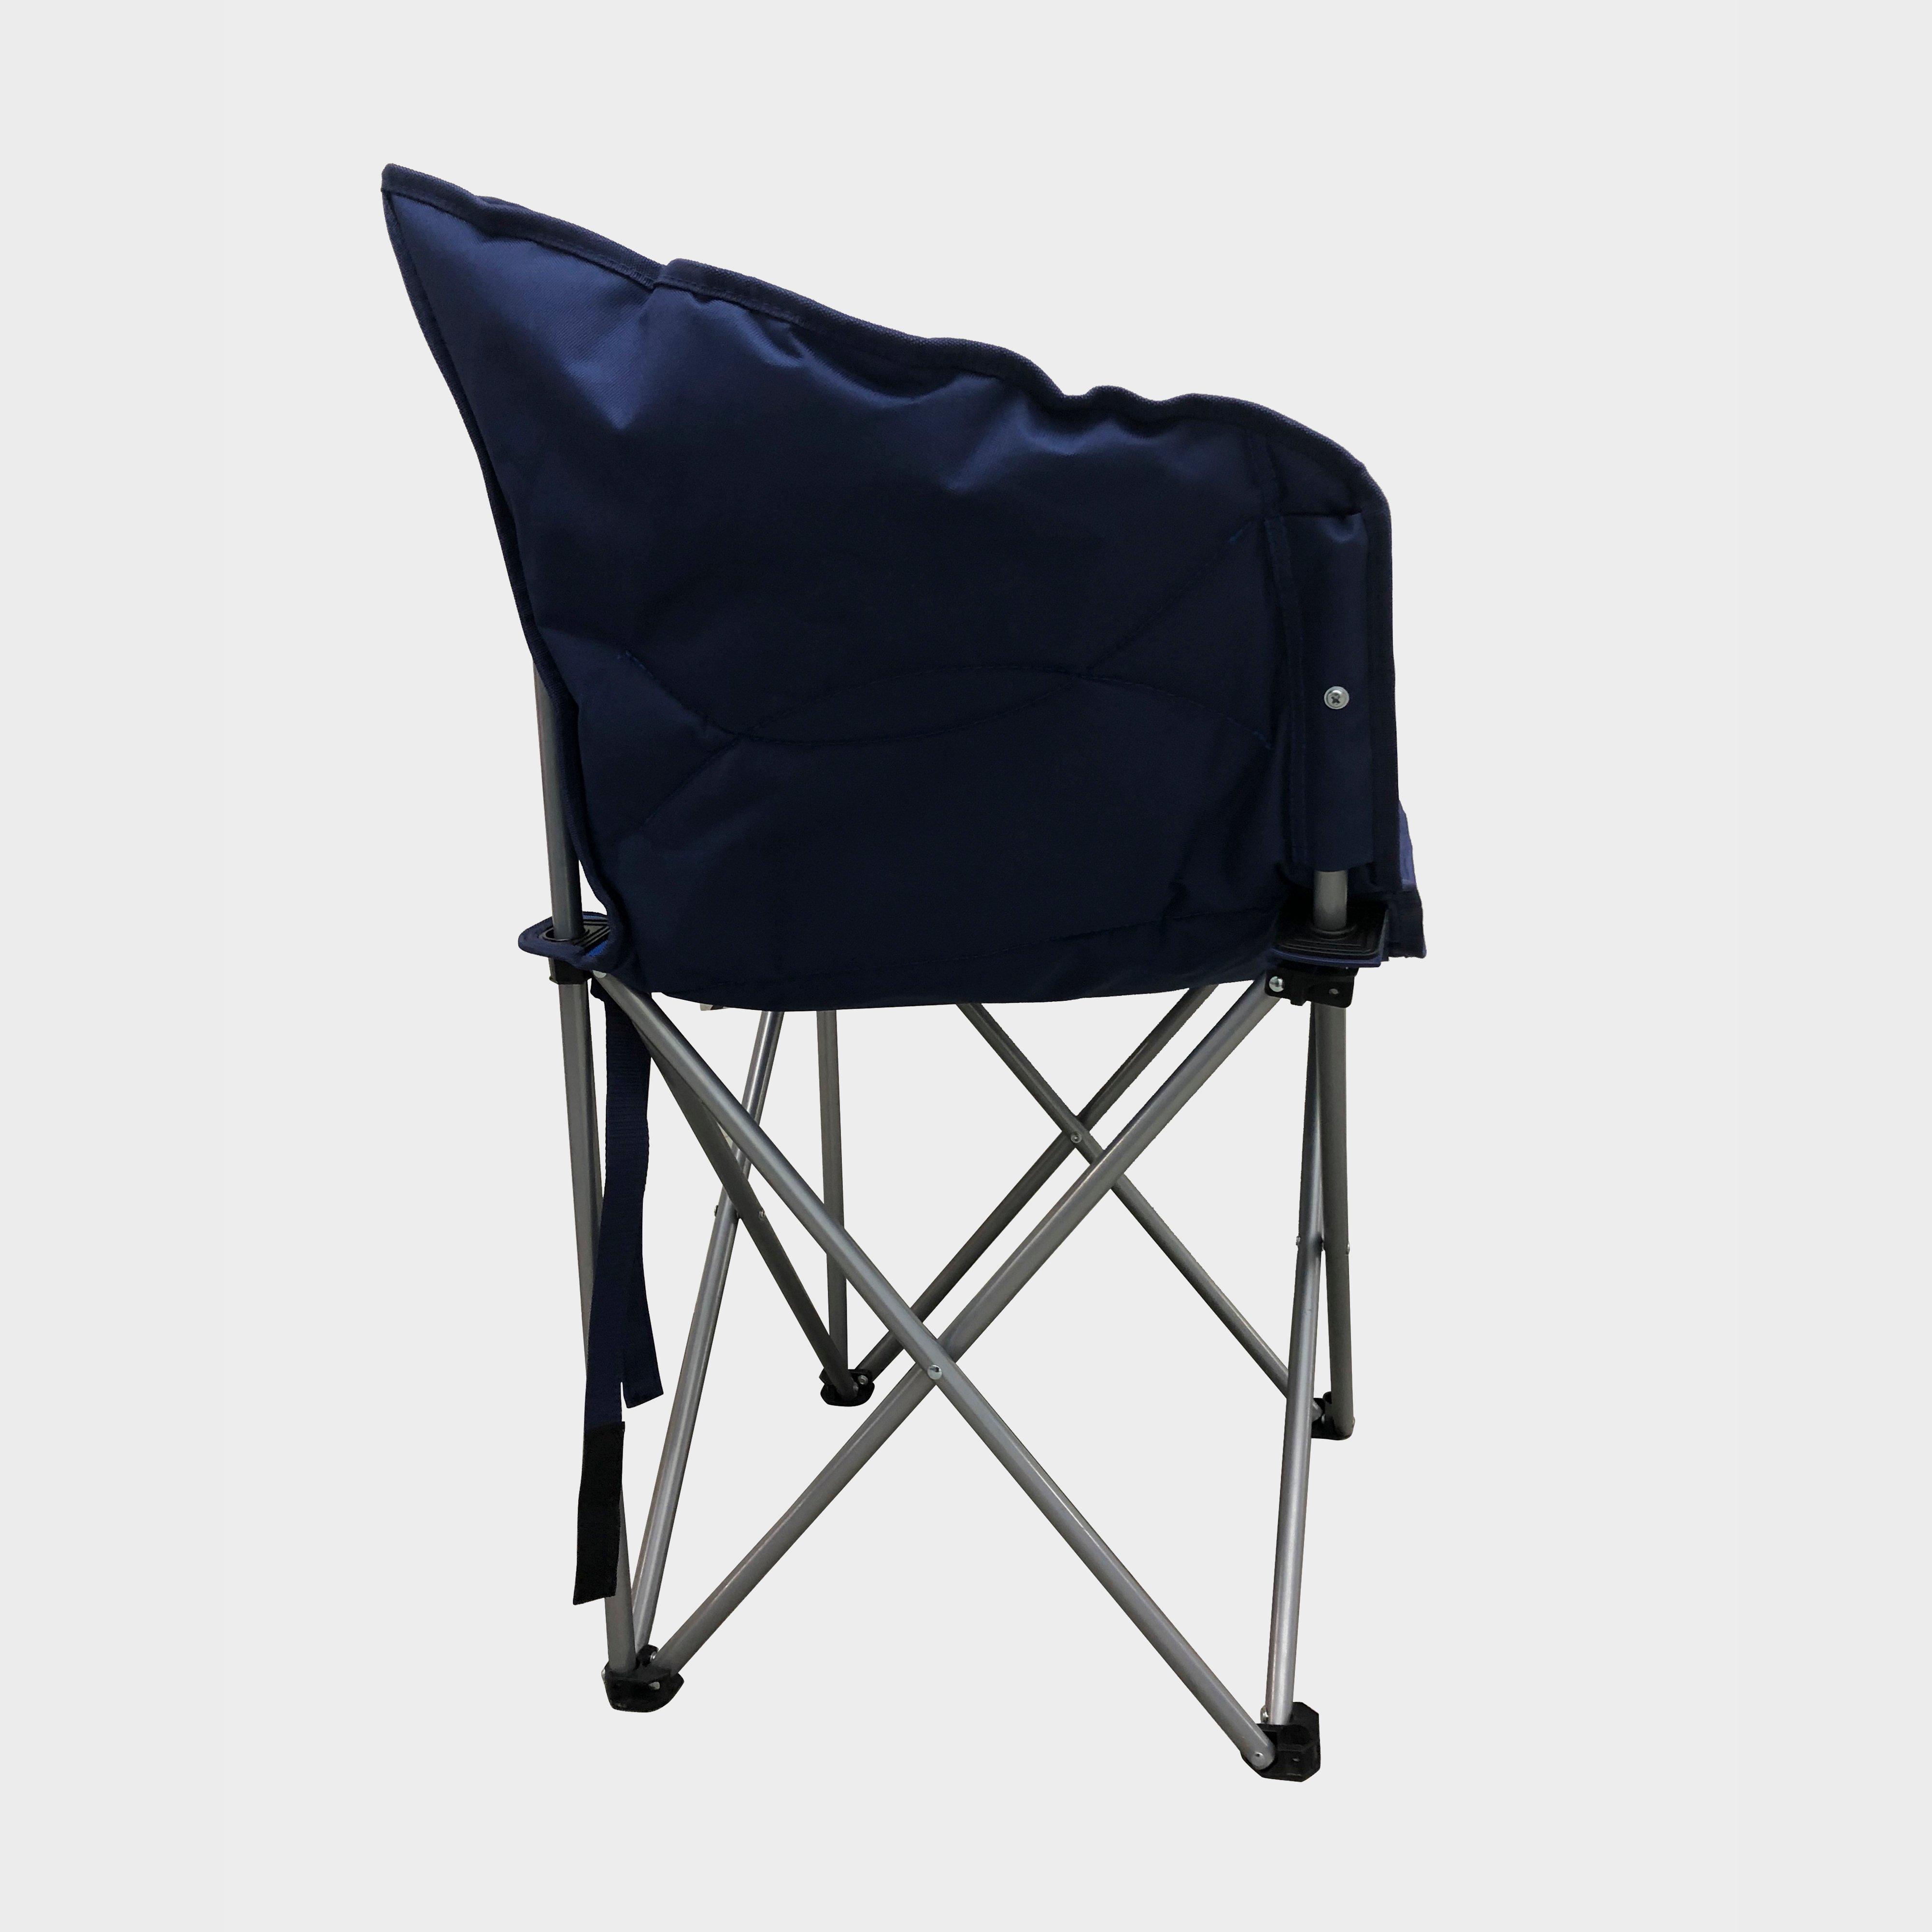 Eurohike Quilted Tub Chair Review